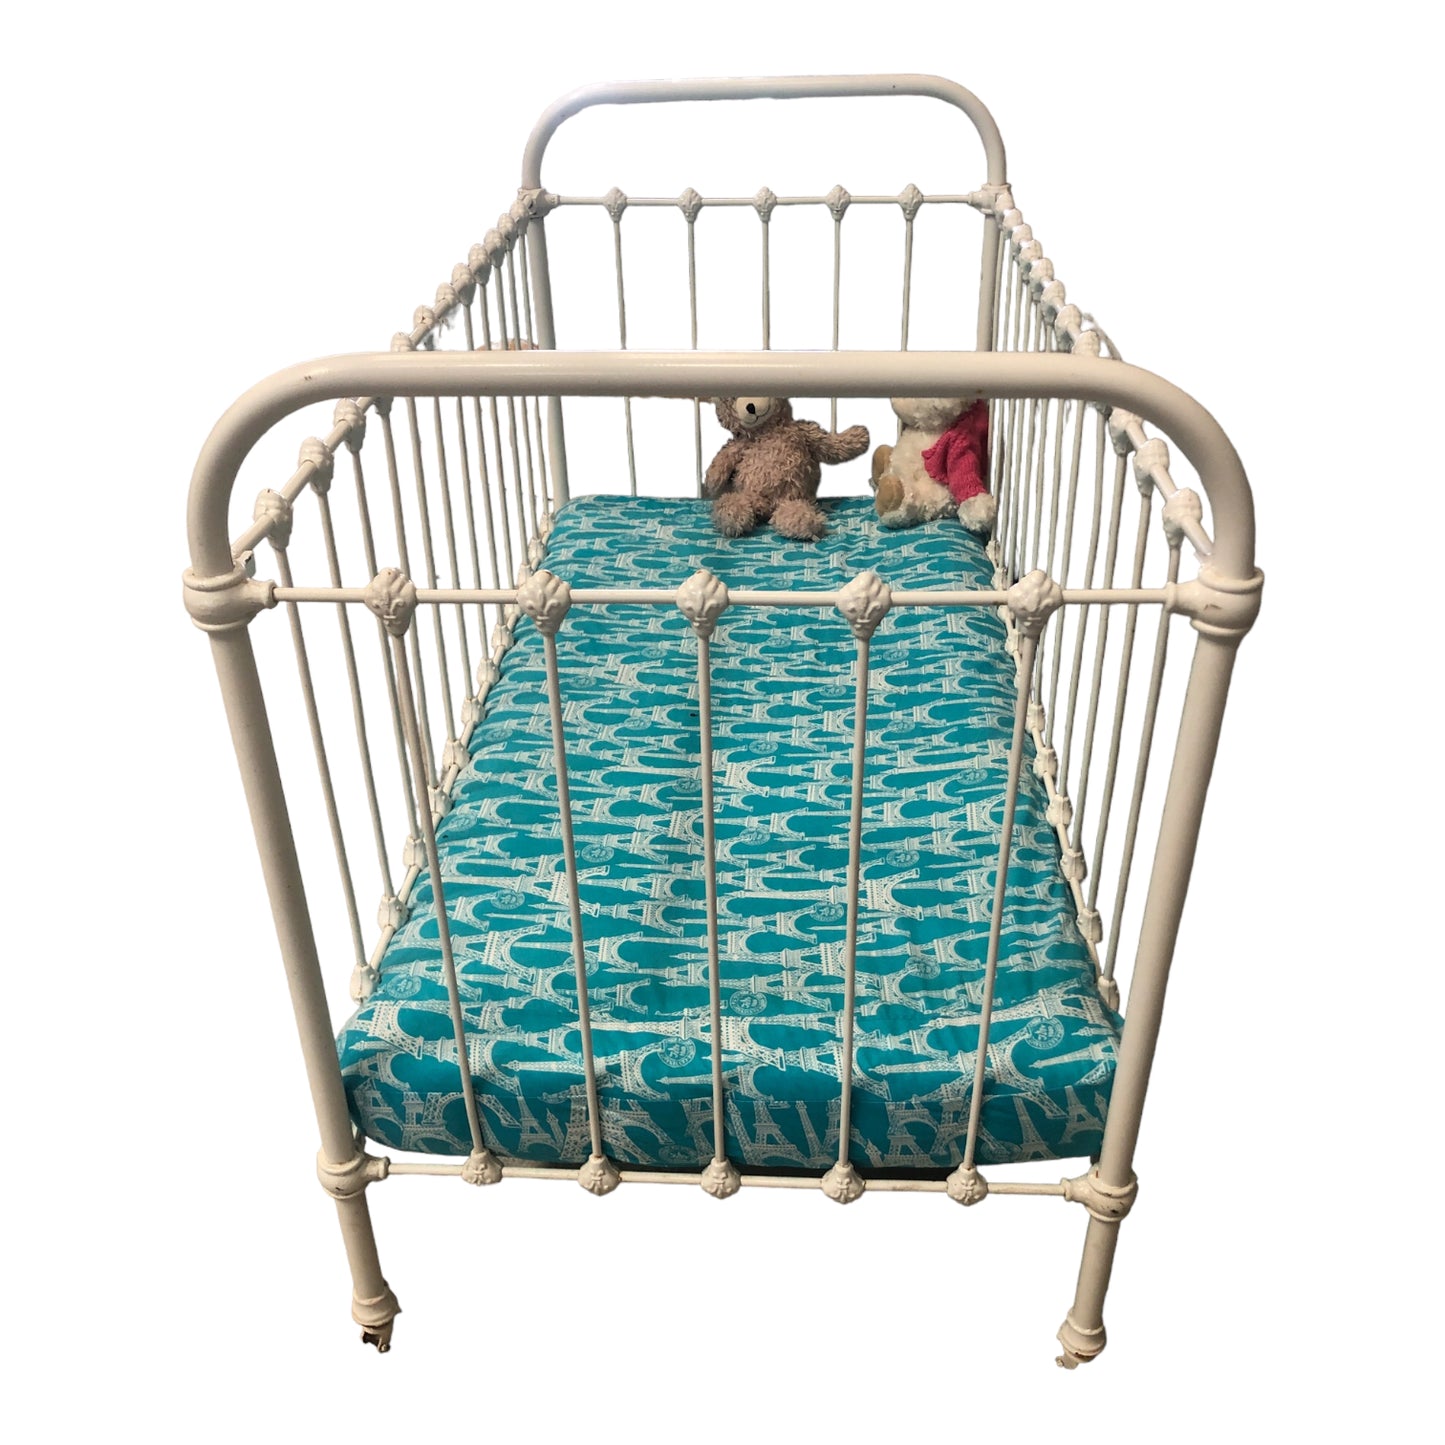 Vide Maison Riviera - Wrought iron baby bed for young child

